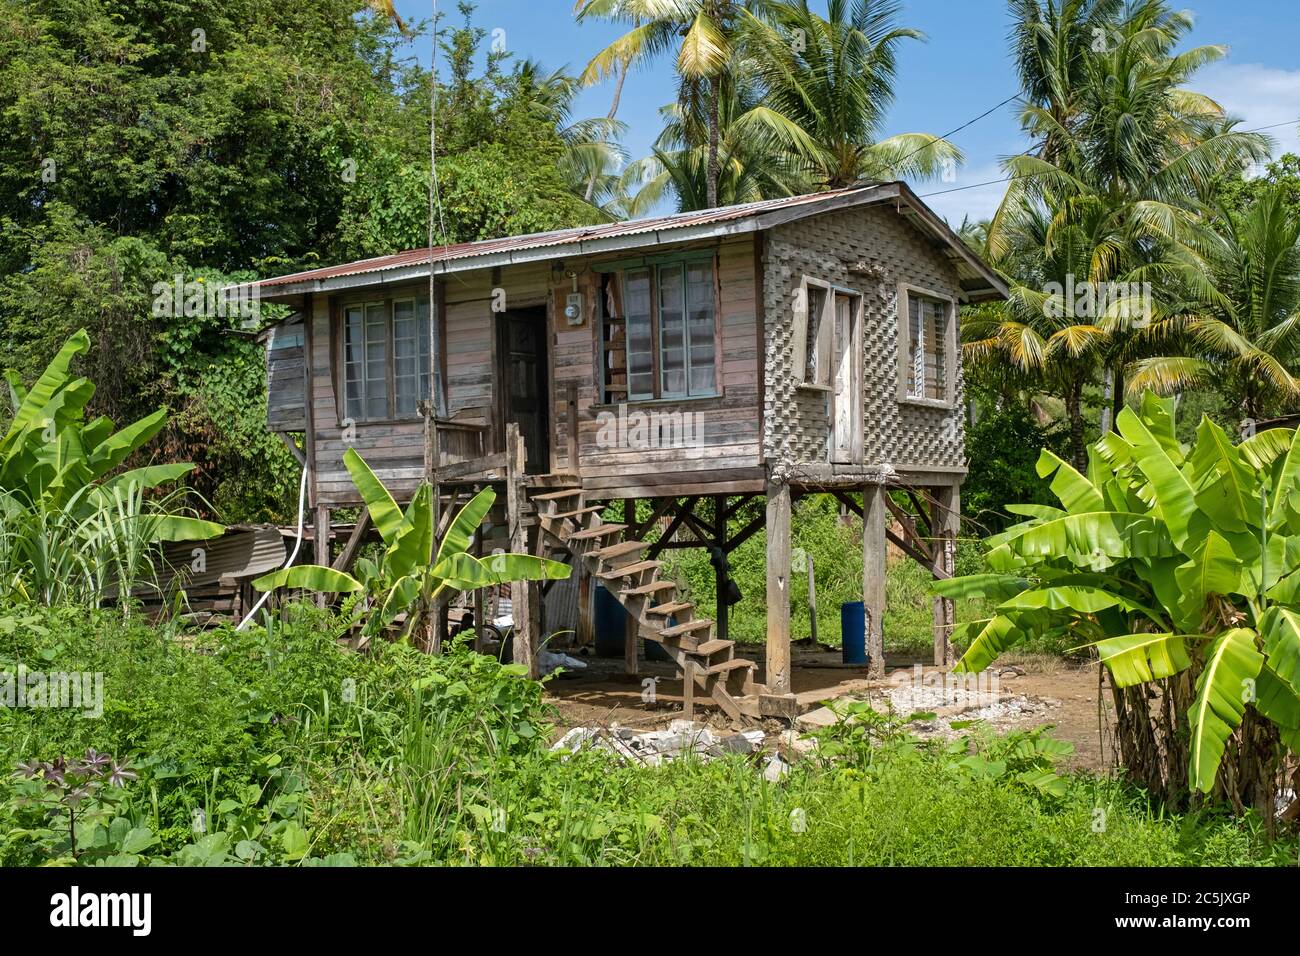 Traditional wooden house on stilts in rural Guyana, South America Stock Photo